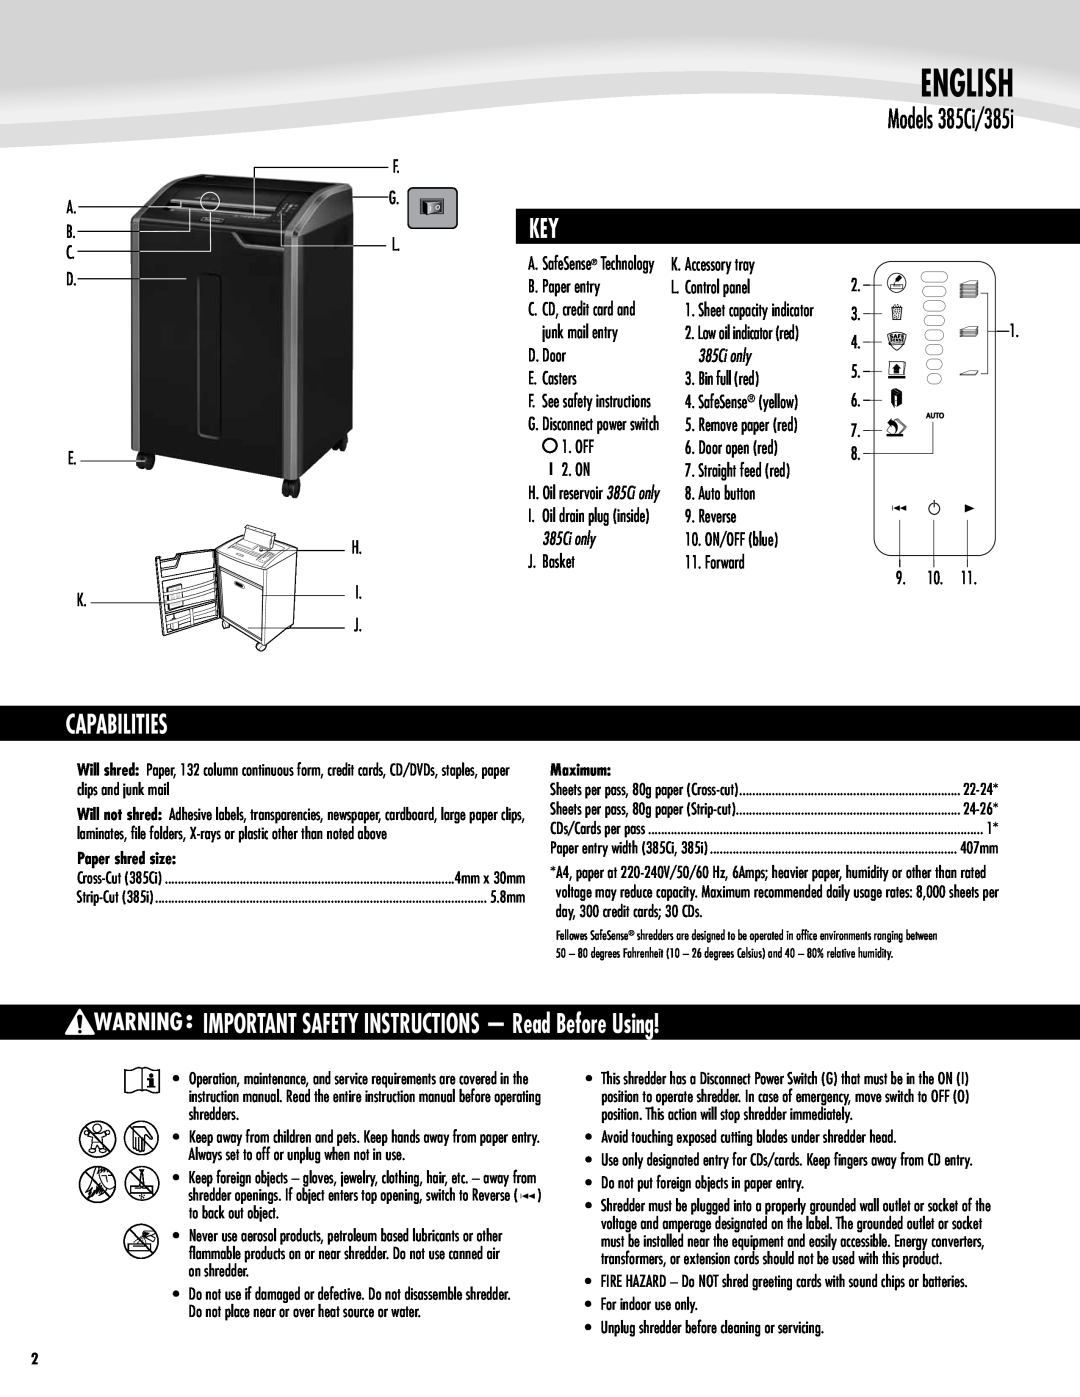 Fellowes manual English, Capabilities, IMPORTANT SAFETY INSTRUCTIONS - Read Before Using, Models 385Ci/385i, 385Ci only 